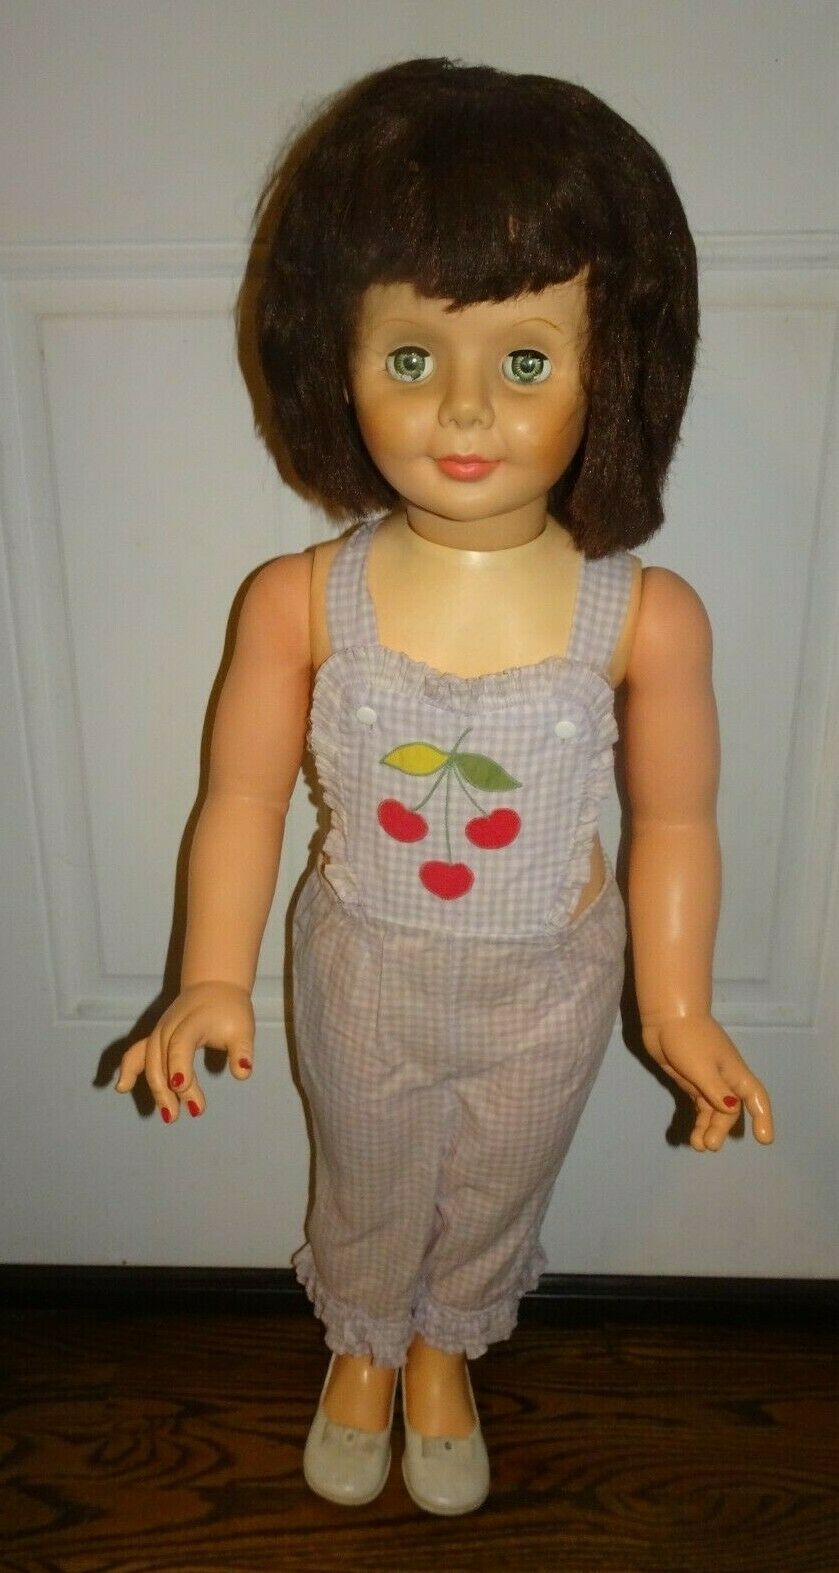 Vintage Unmarked Ideal? Patty Playpal 35-6 34"  Brunette Doll